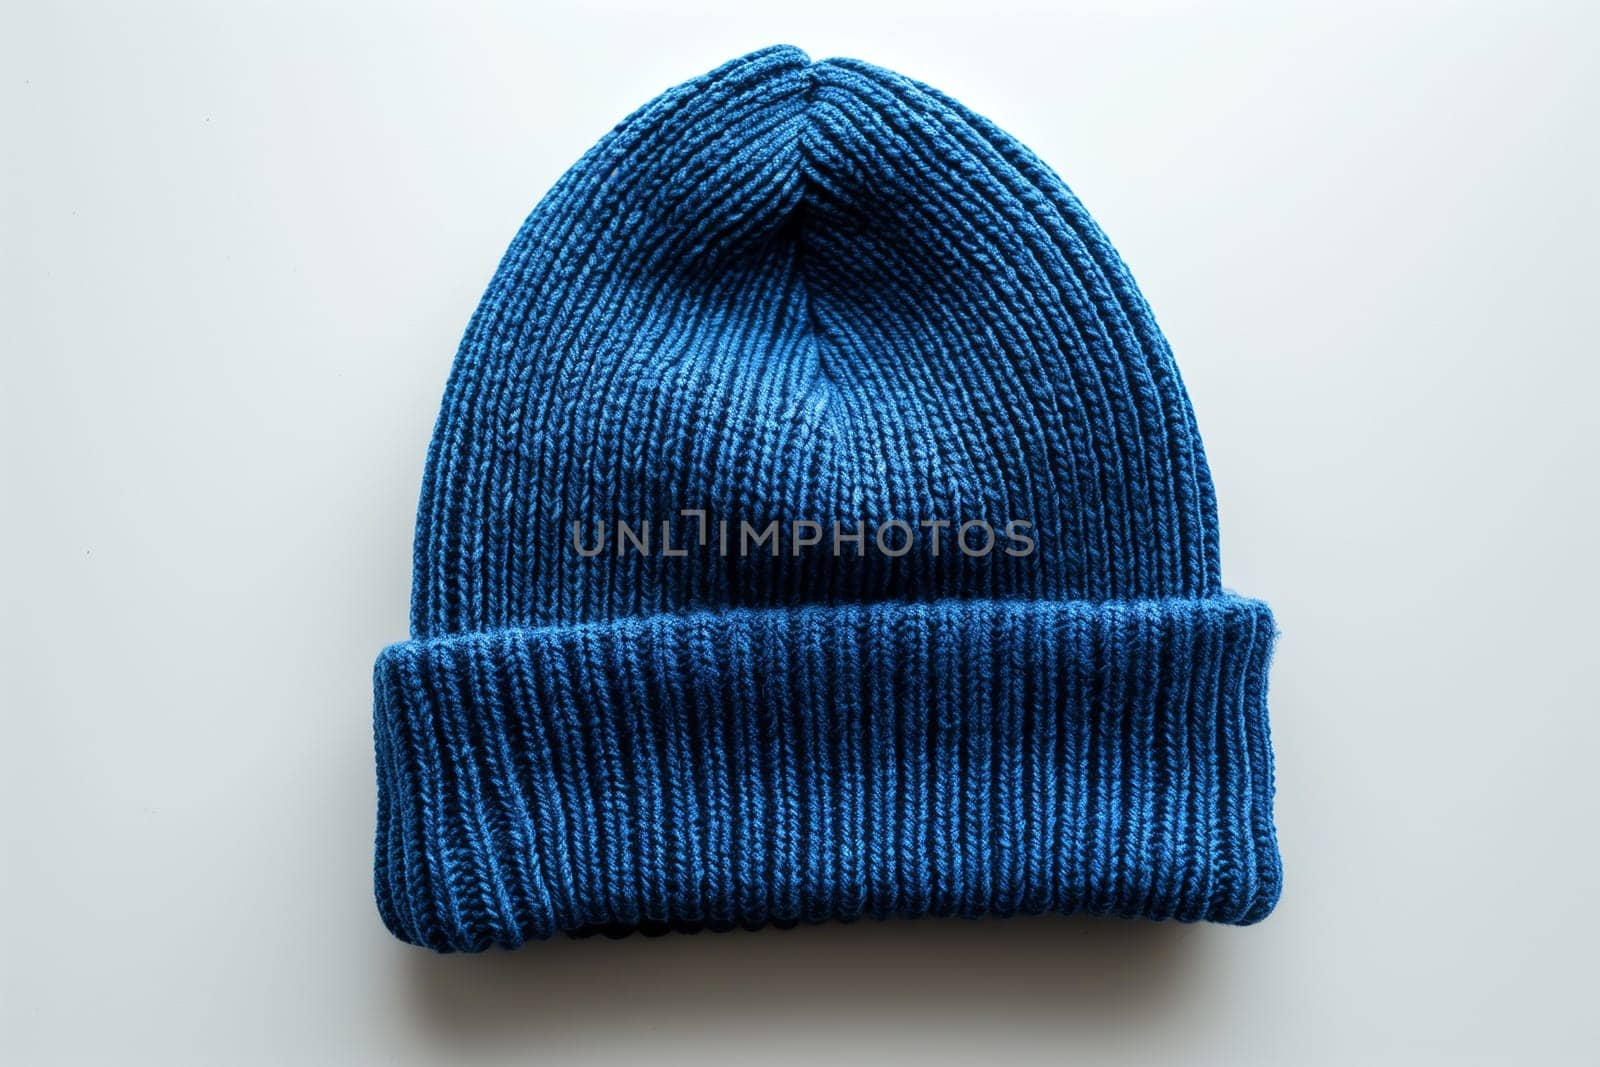 A blue knitted hat placed on a plain white background, showcasing the texture and color of the hat.